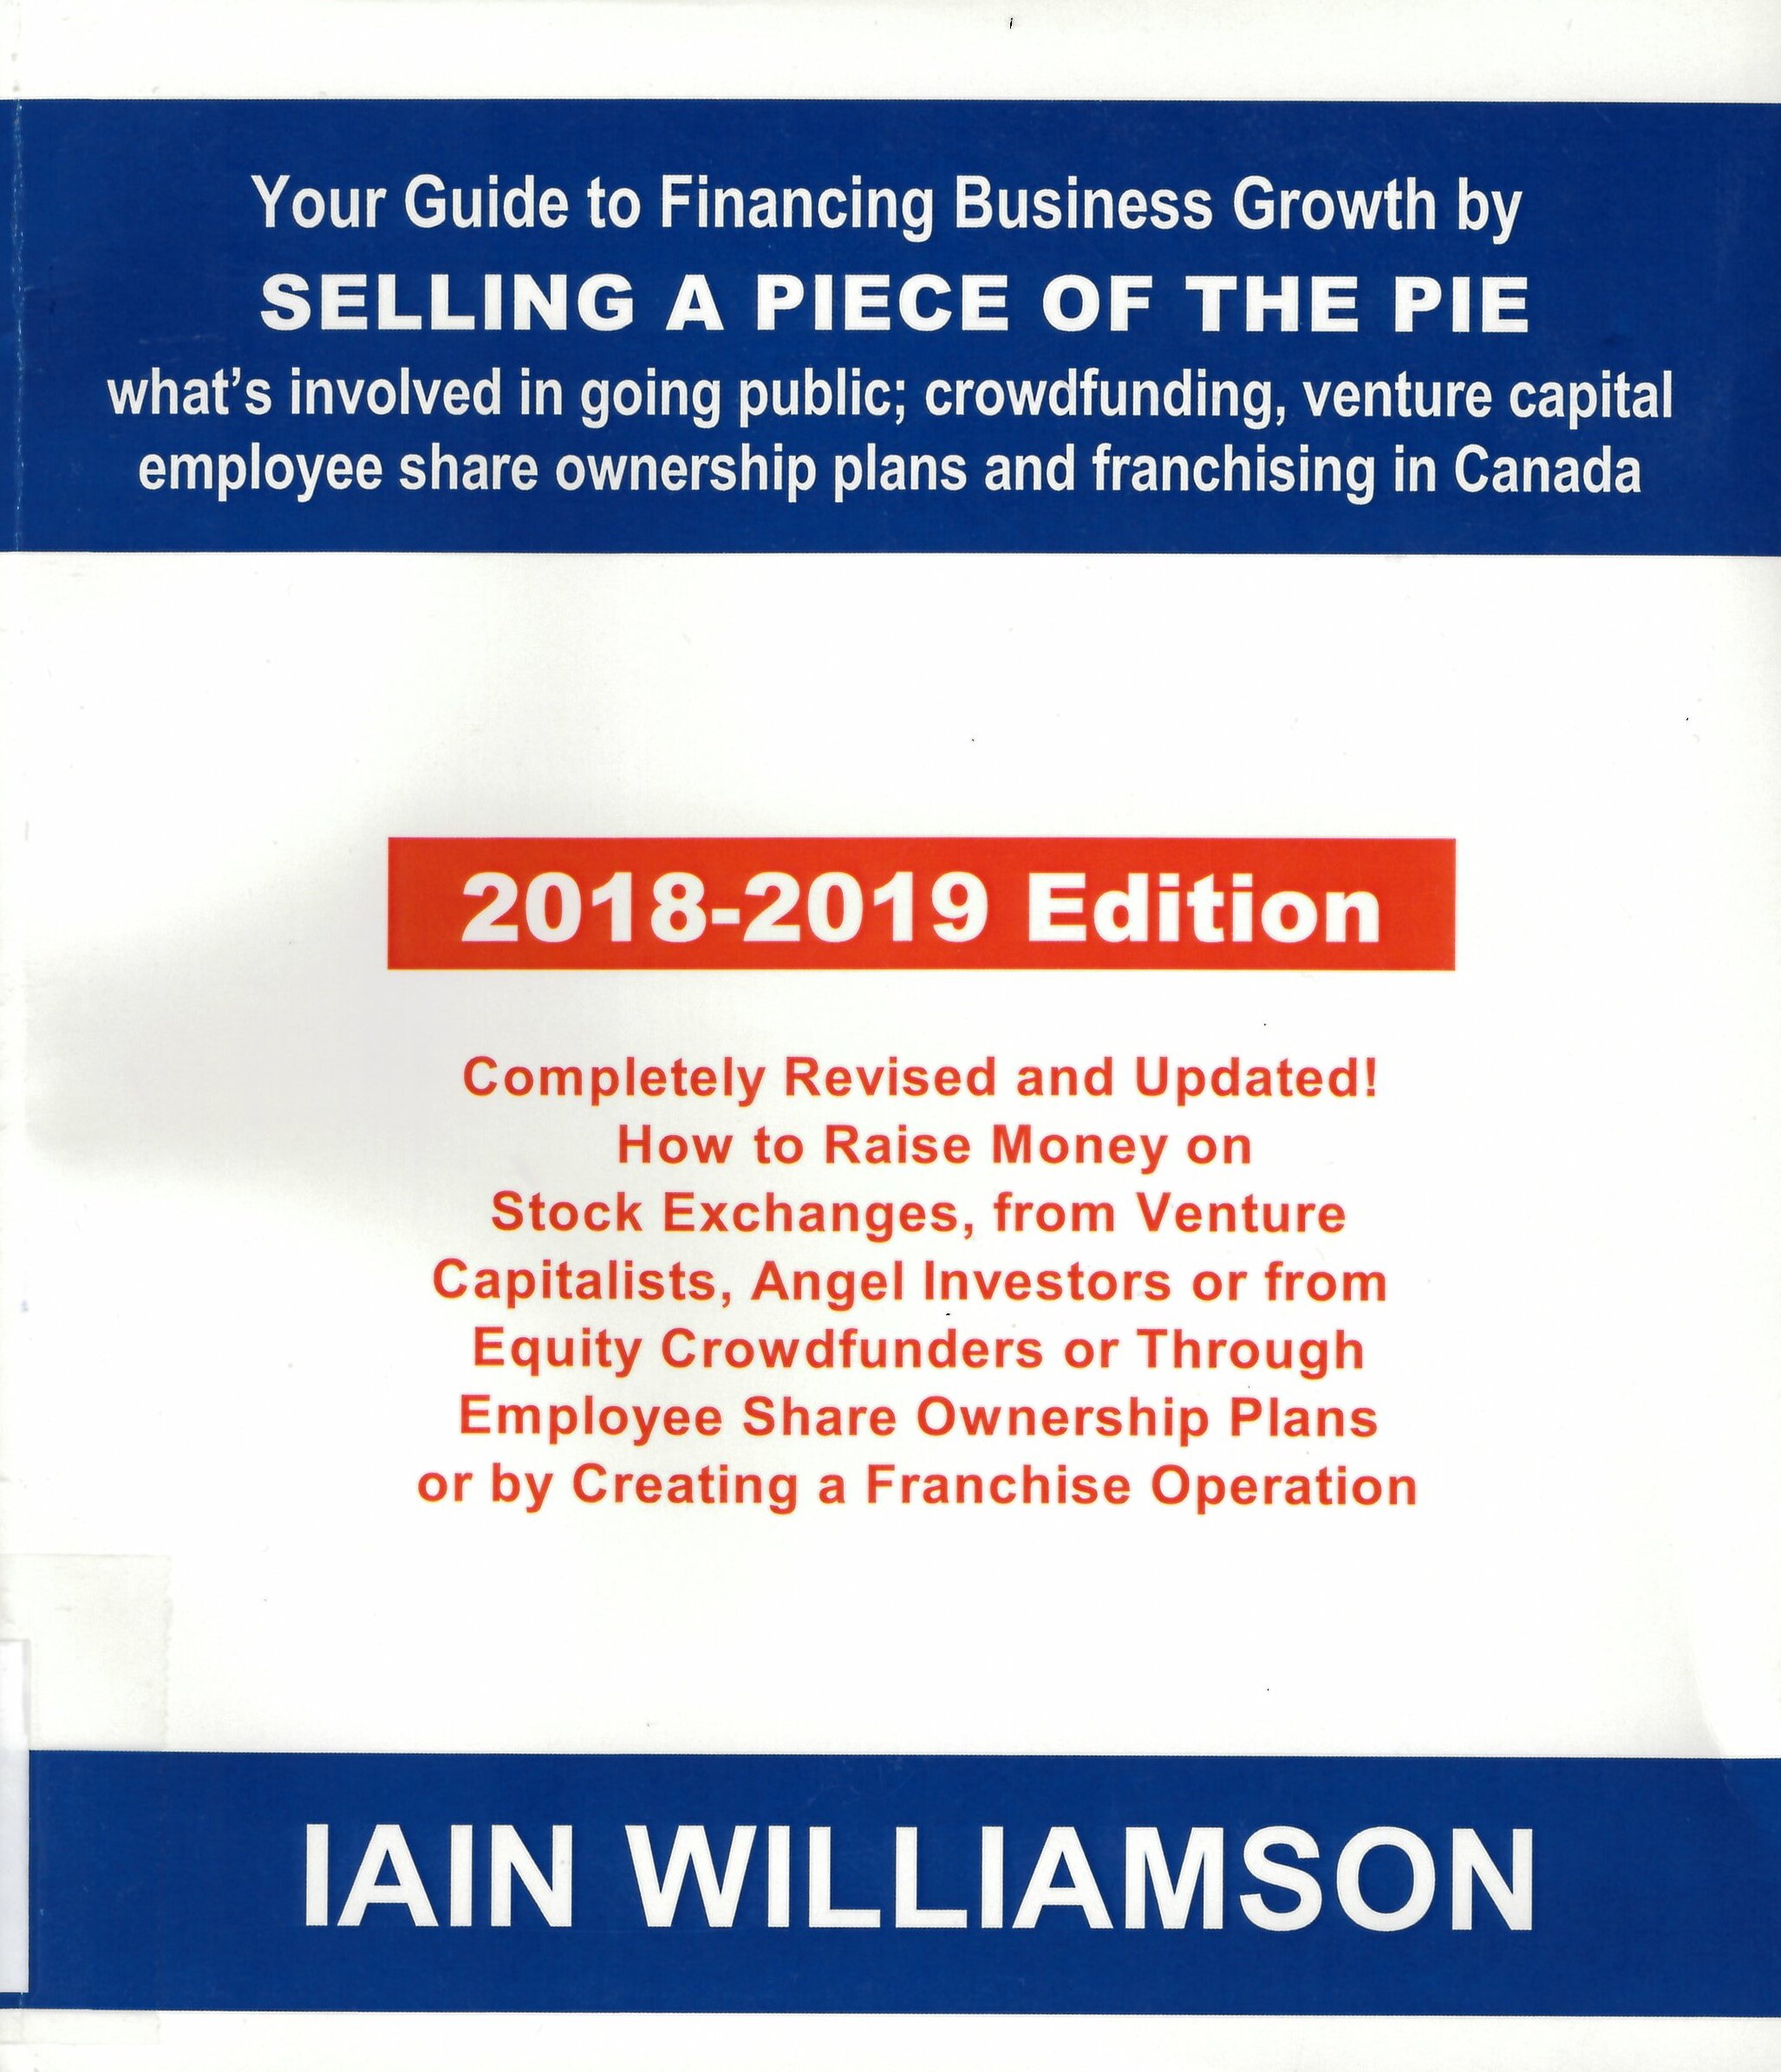 Your guide to financing business growth by selling a piece of the pie : what's involved in going public, crowdfunding, employee share ownership plans and franchising in Canada